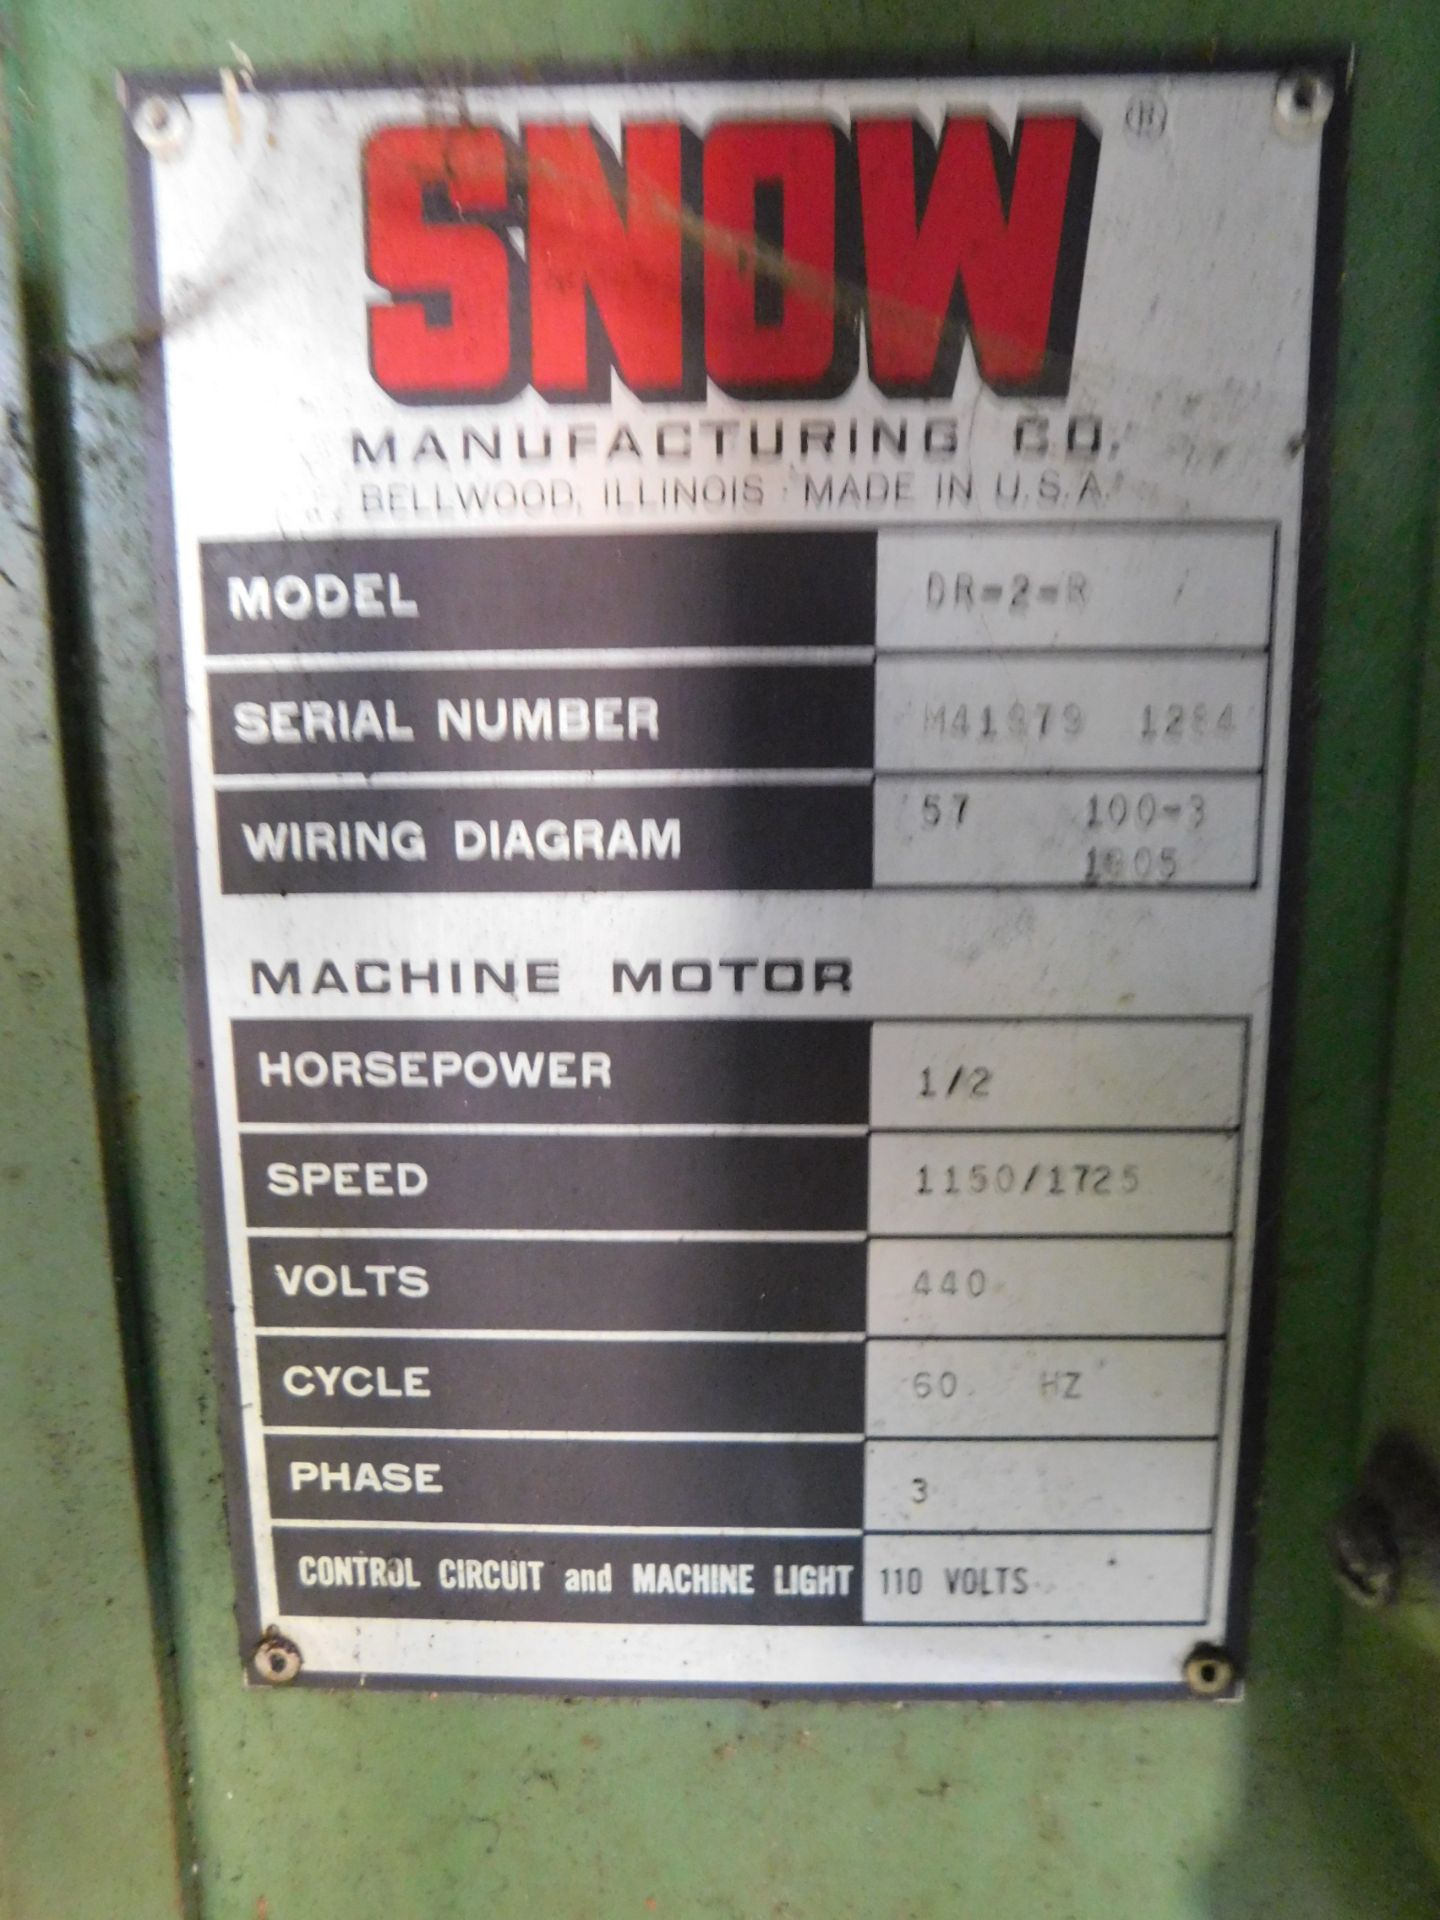 Snow Model DR-2-R Tapping Machine, s/n M41979-1284 - Image 8 of 8